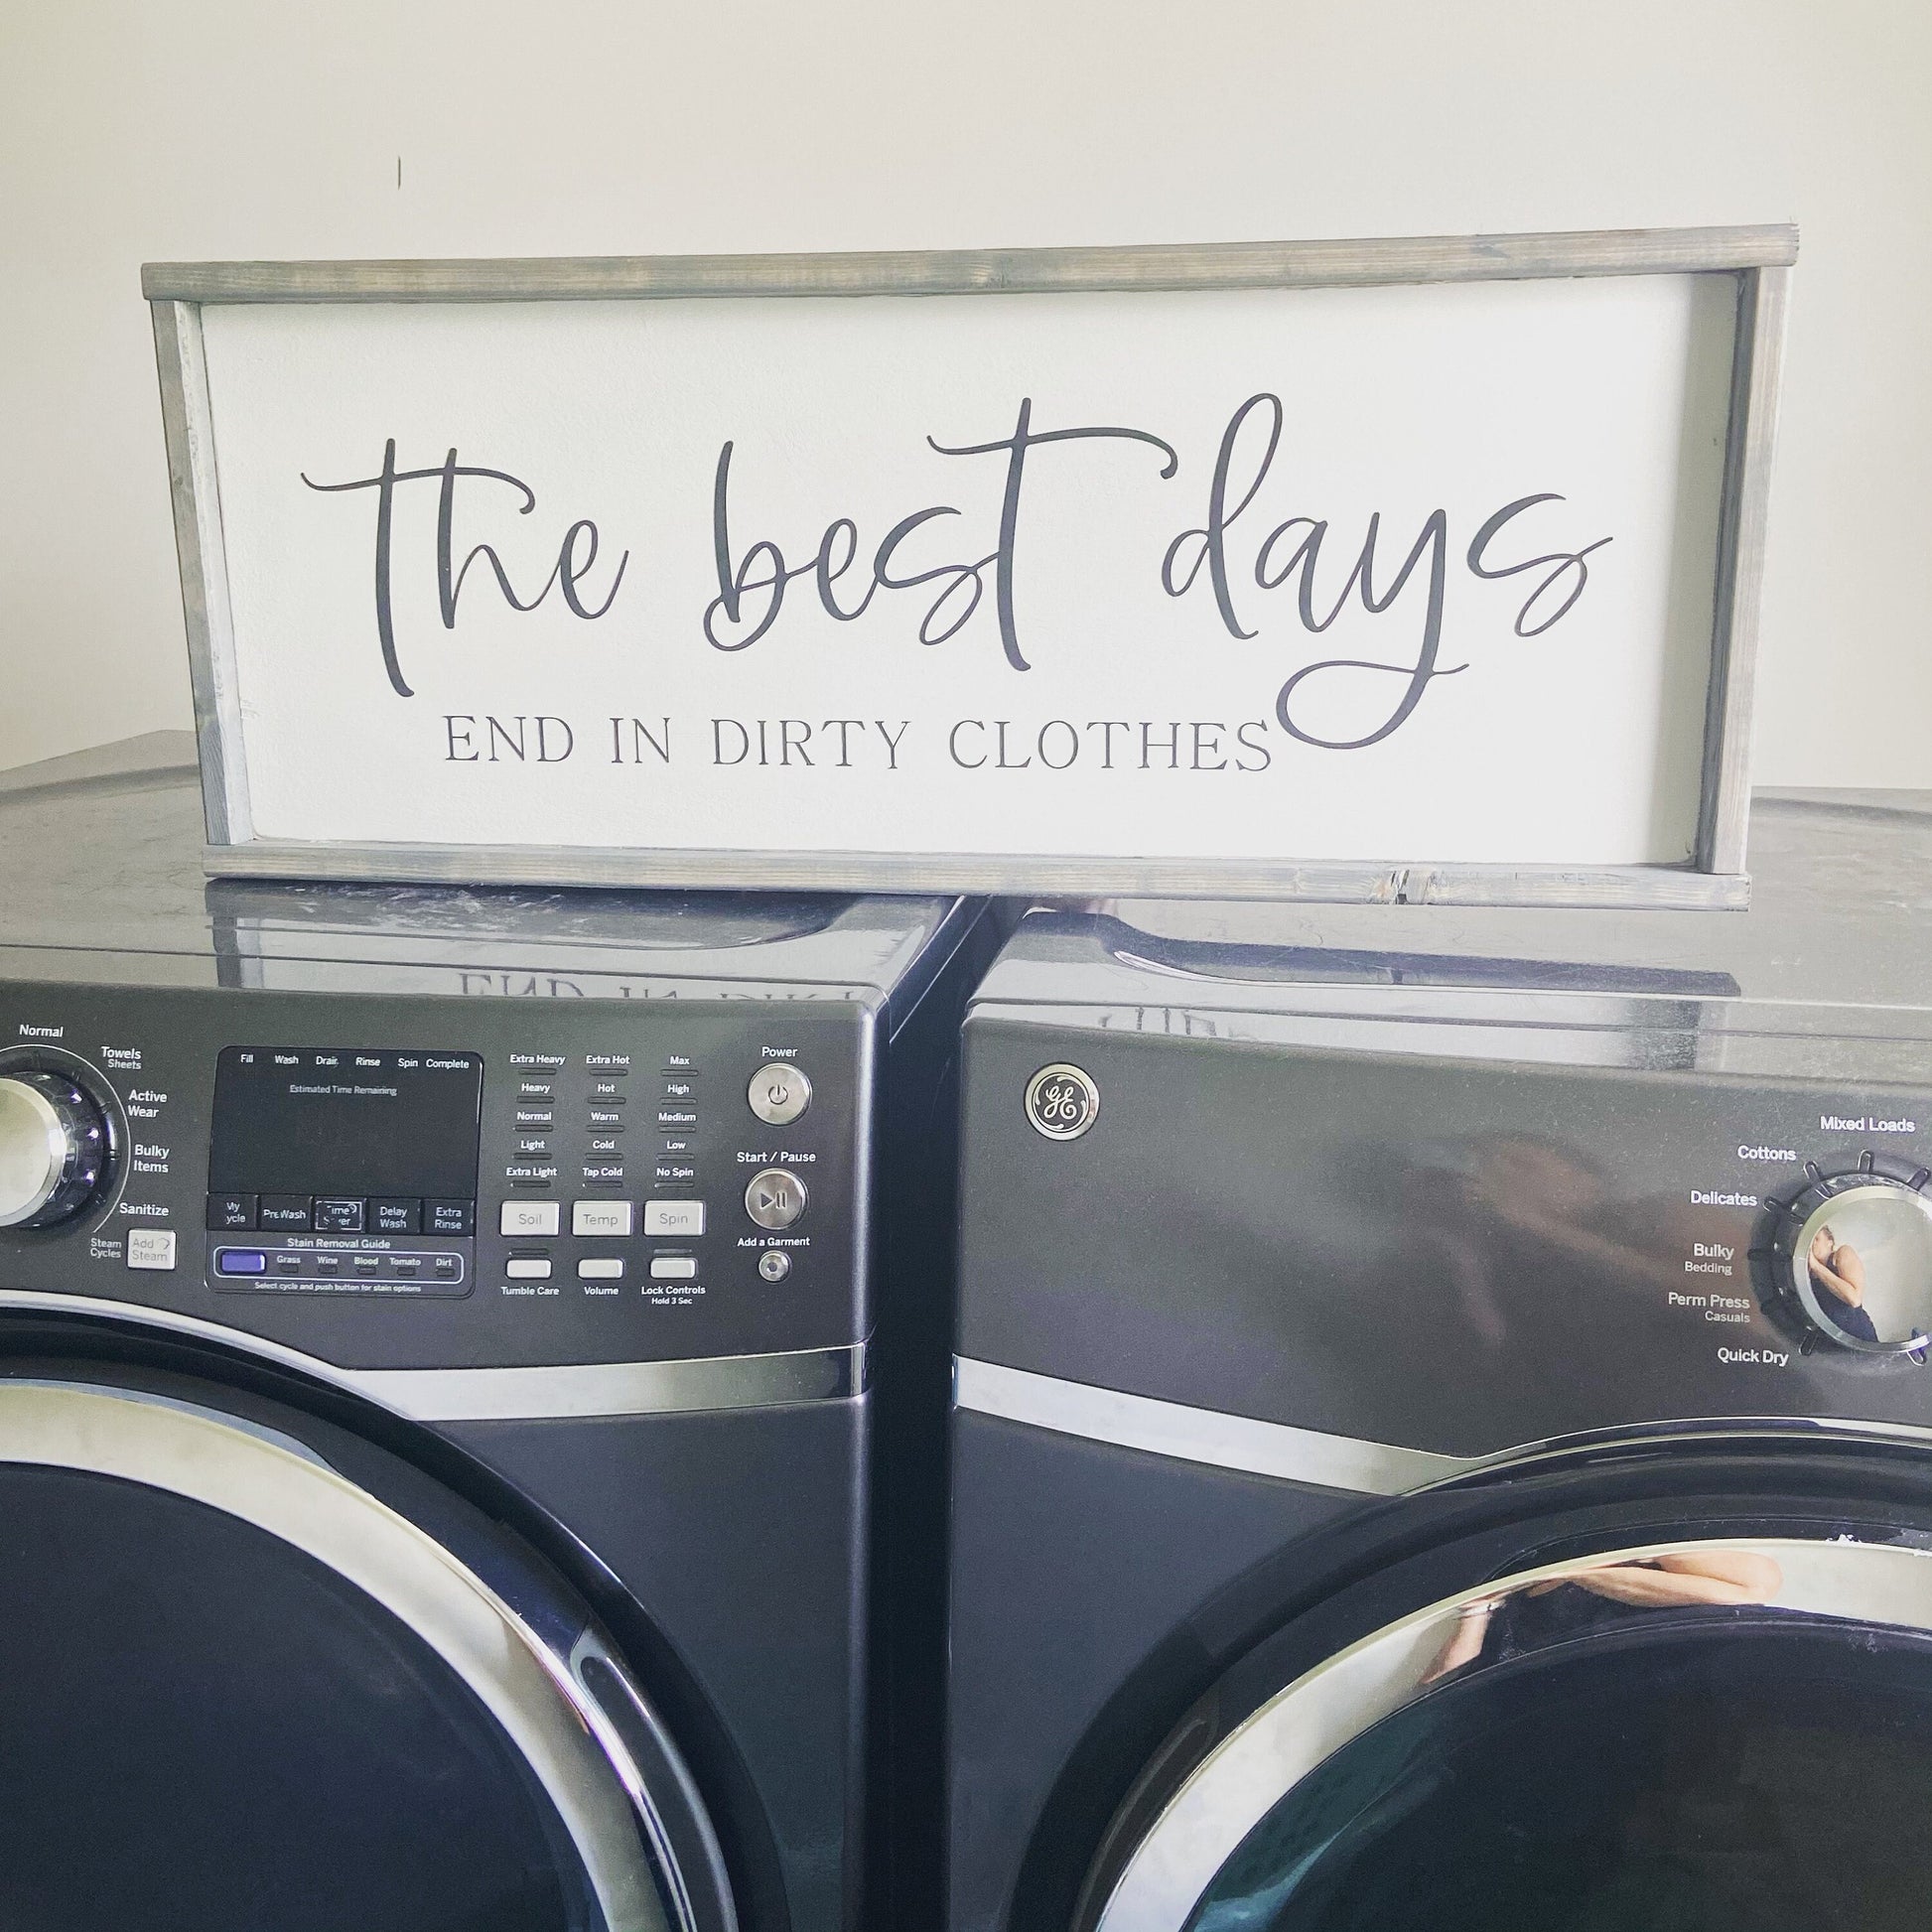 the best days - laundry room sign [FREE SHIPPING!]